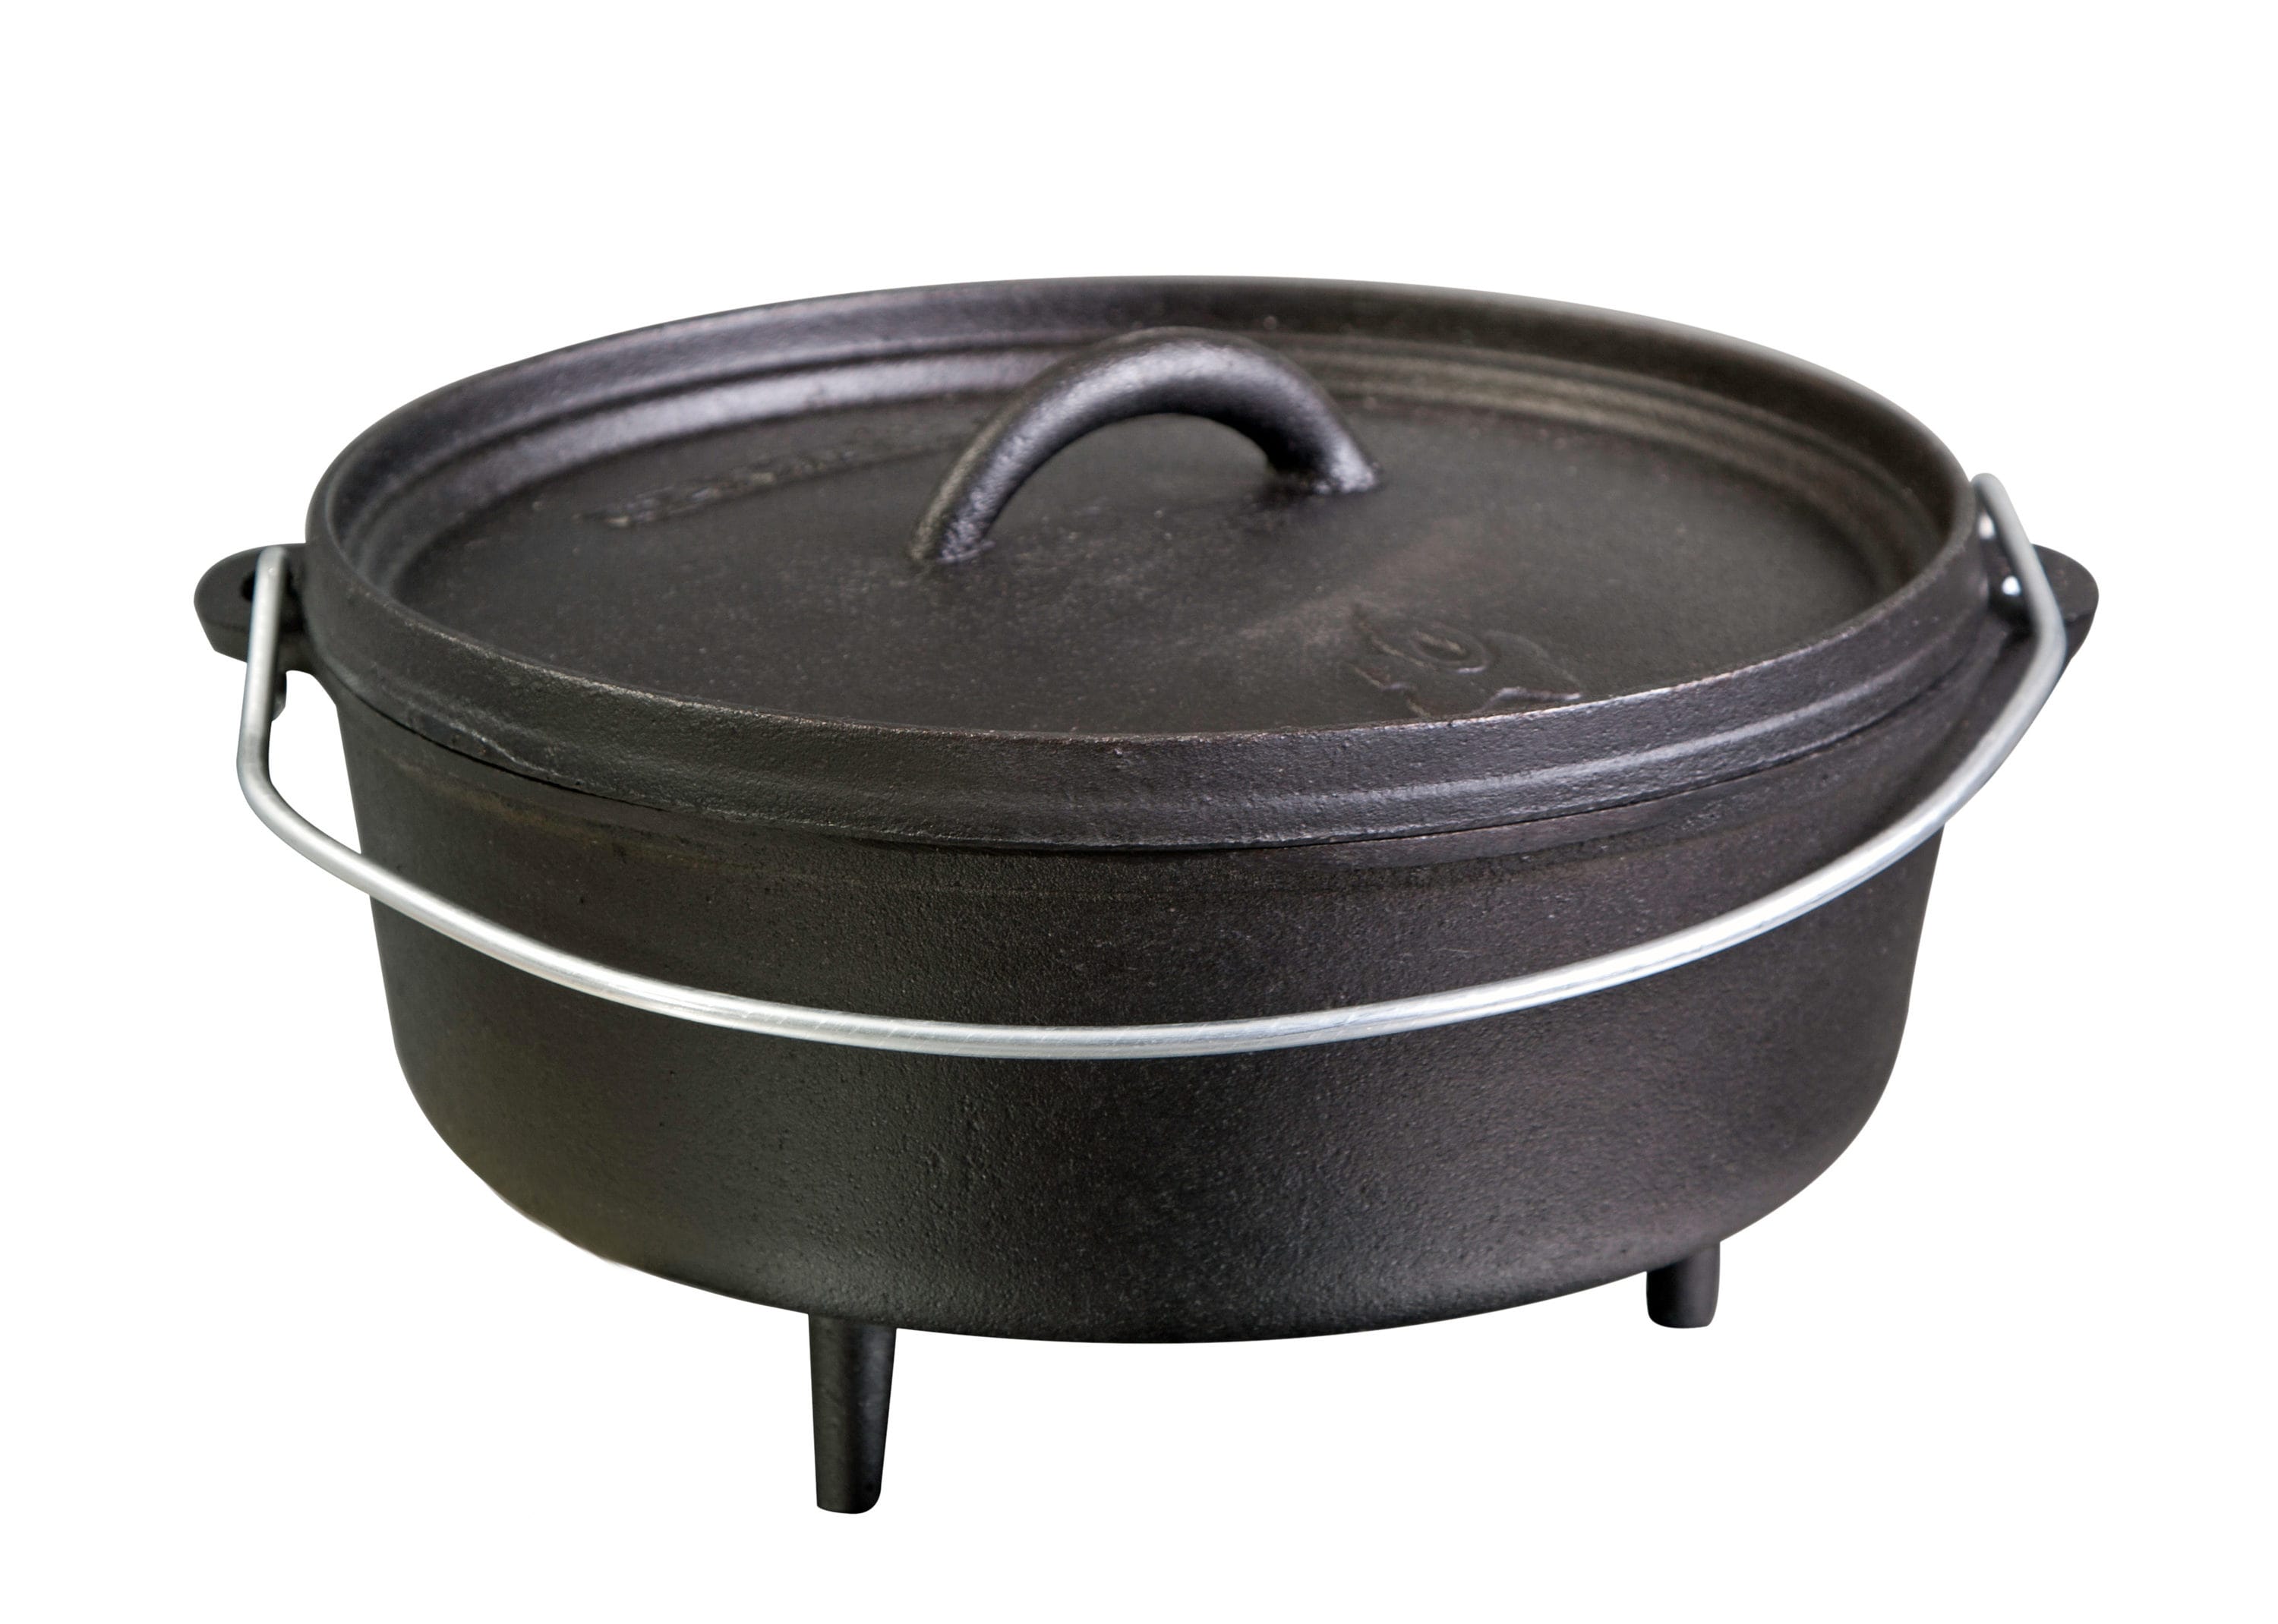 Camp Chef Heritage Cast Iron Dutch Oven 12 - Dutch Oven Pot with Lid for  Indoor & Outdoor Cooking - 12 Dutch Oven - 7 Quarts